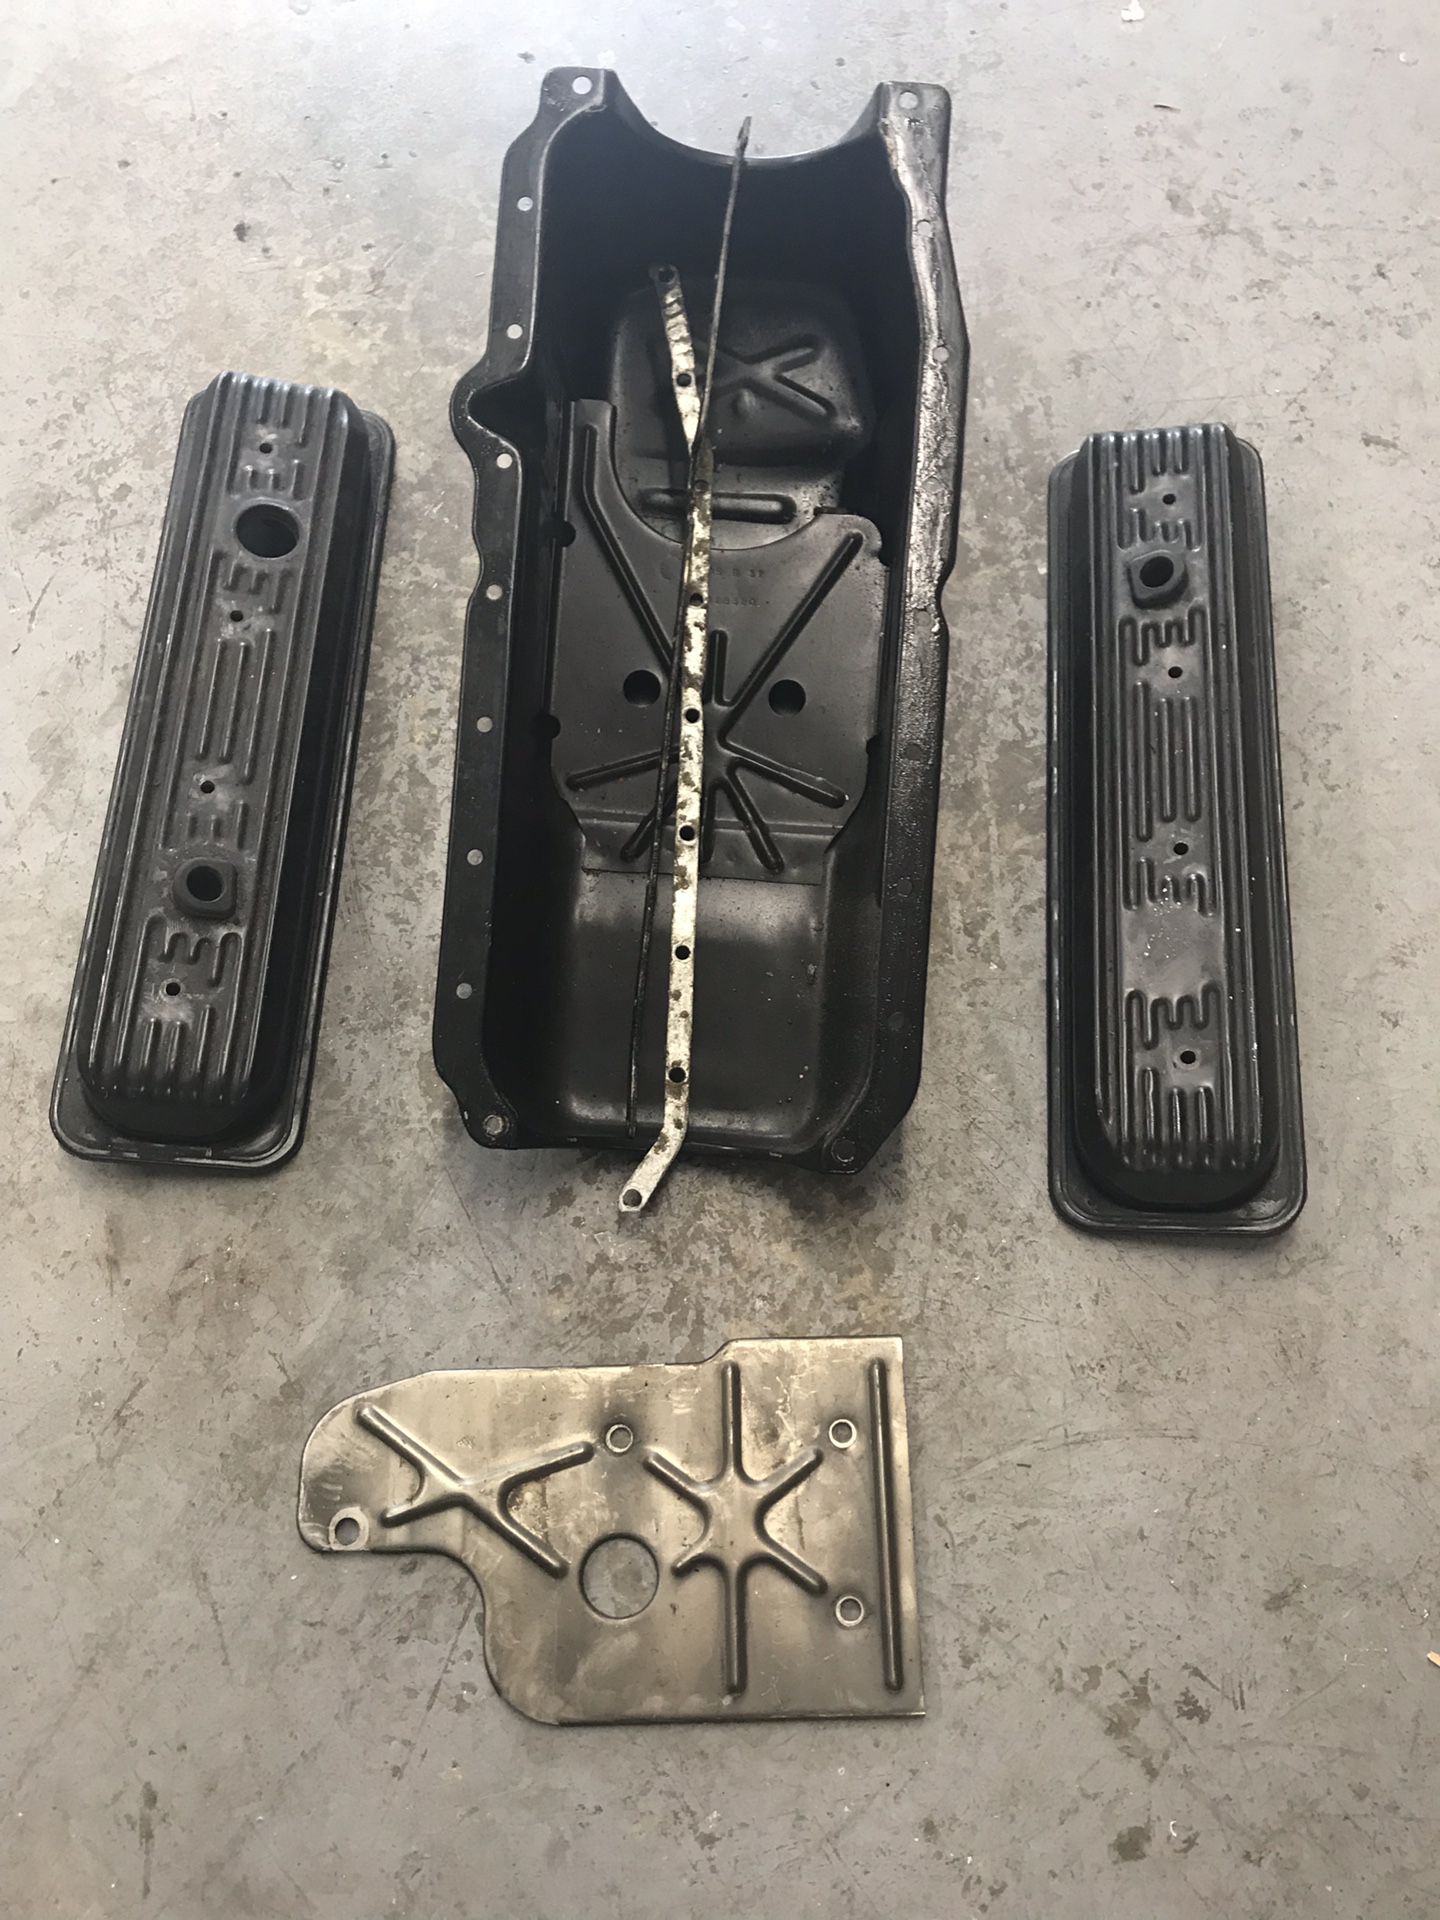 Chevy late model 350 parts